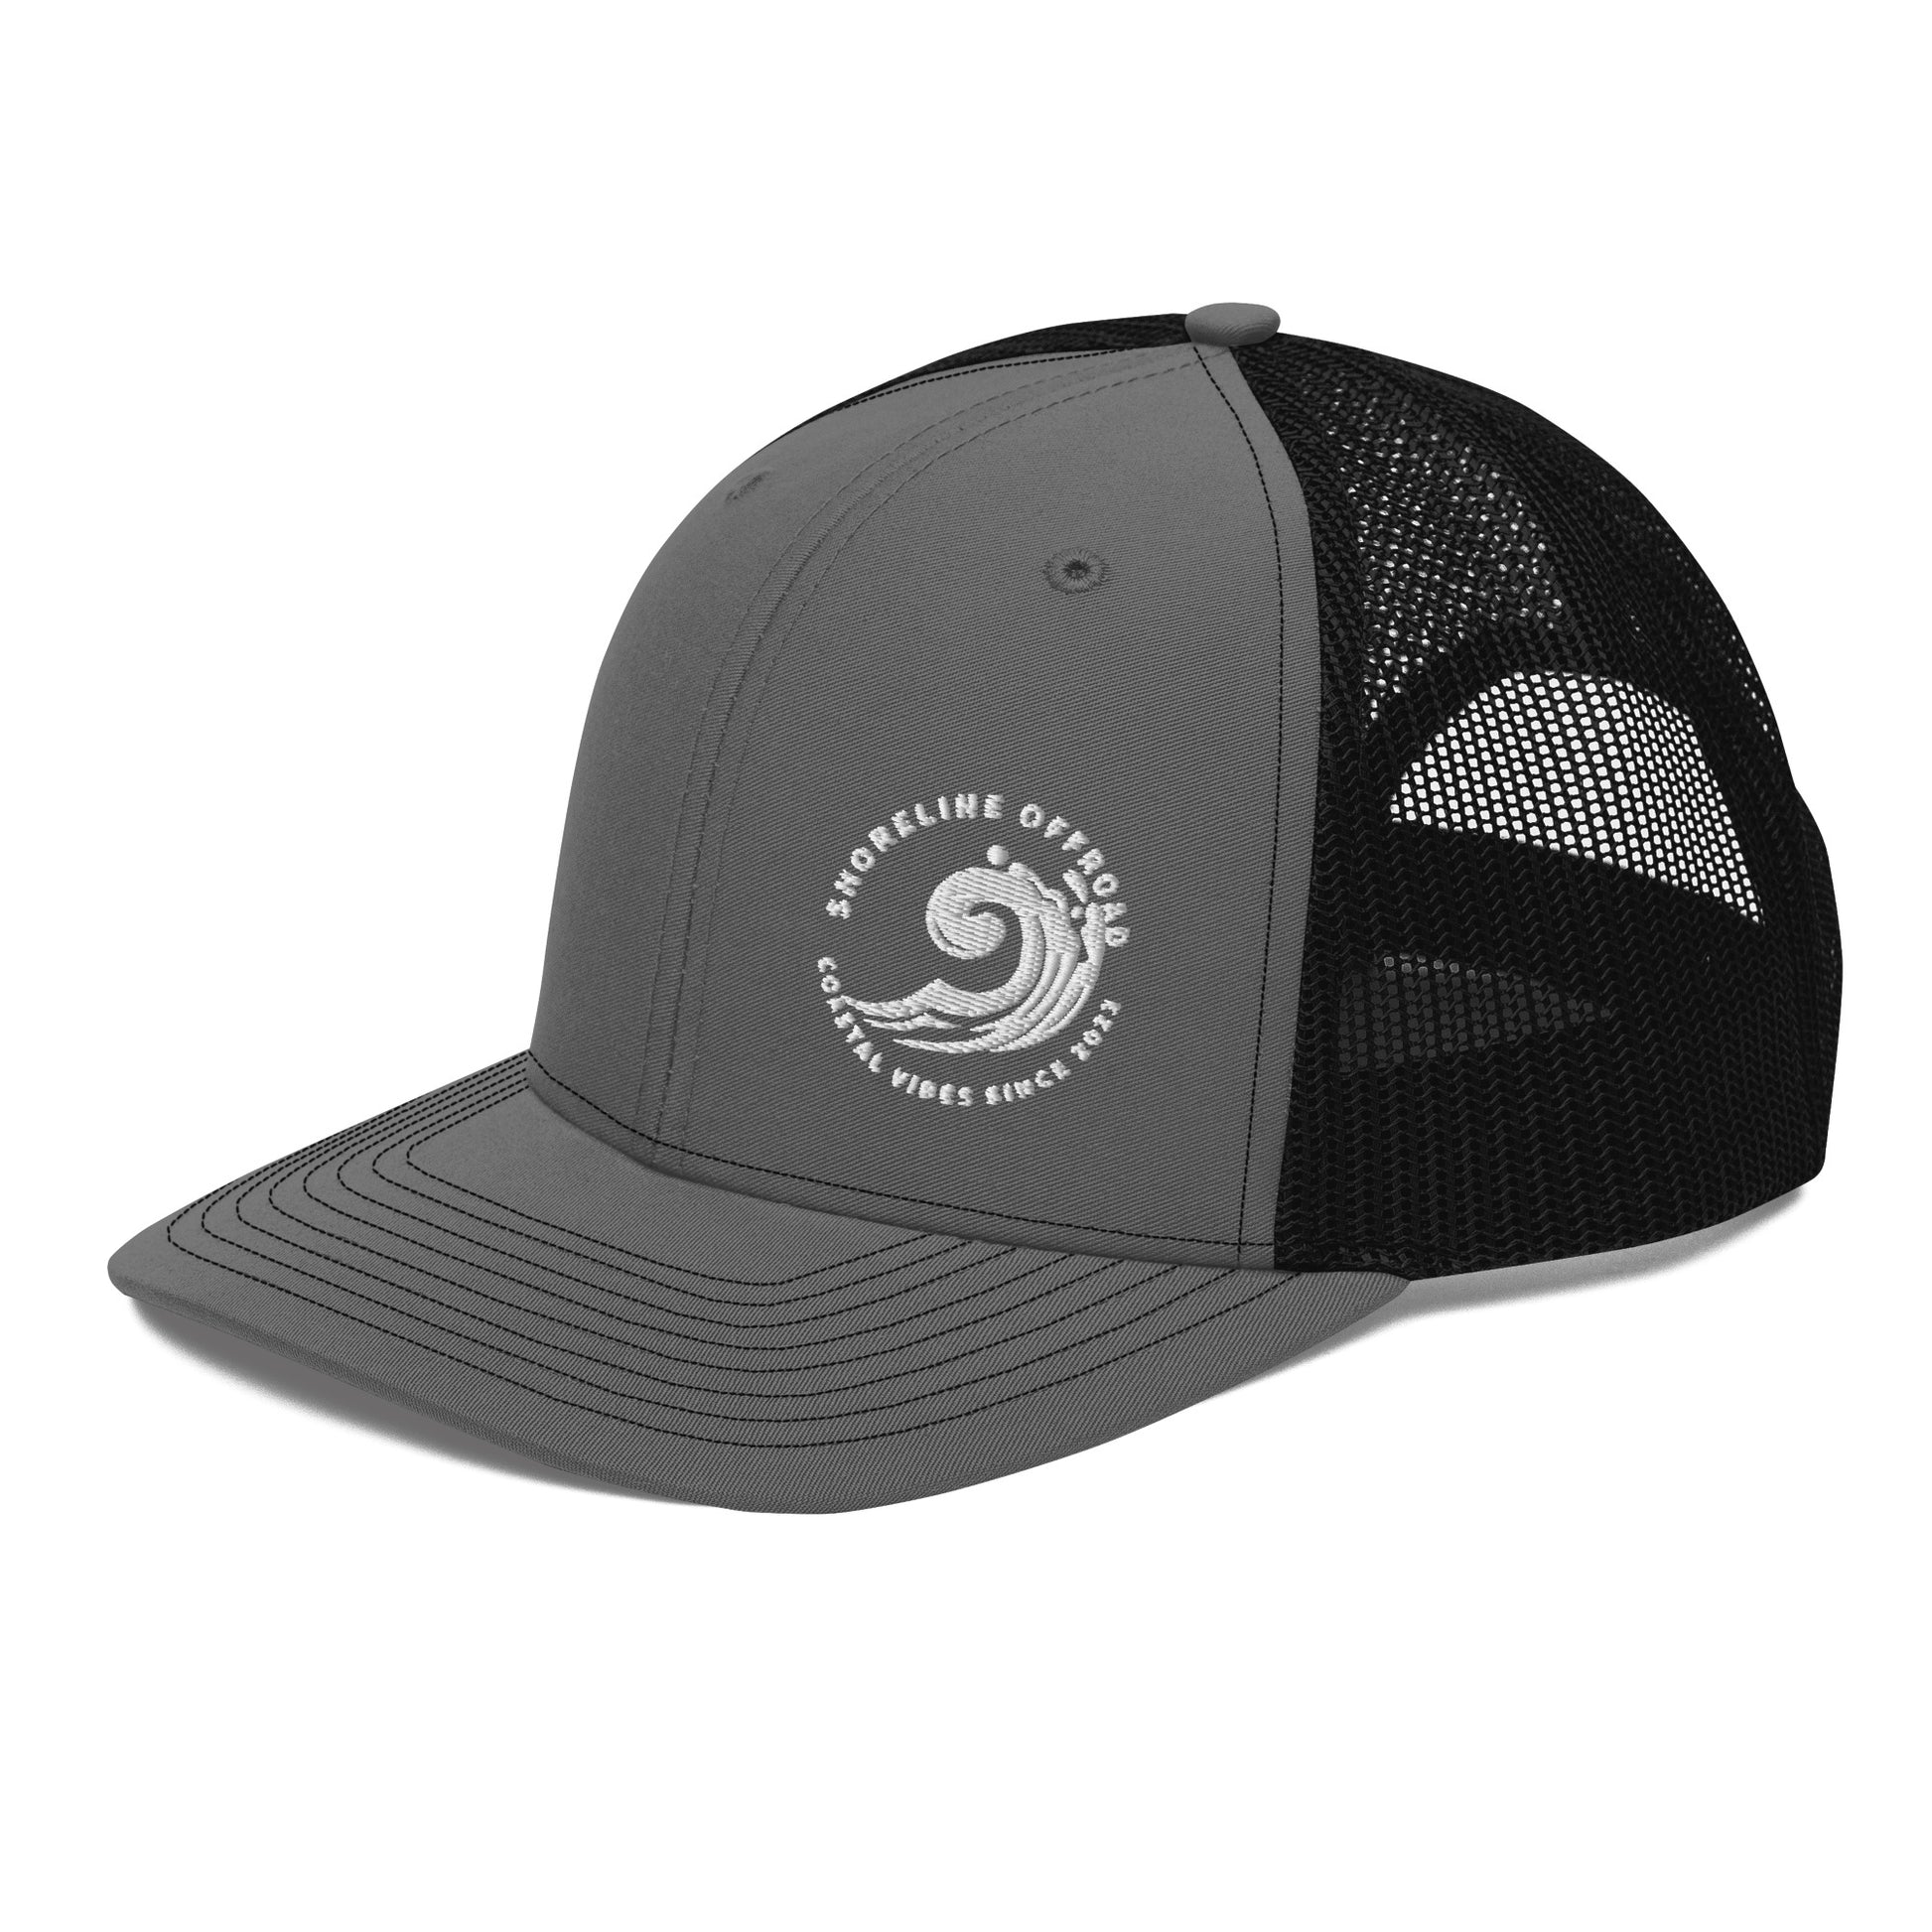 a grey and black trucker hat with a white logo